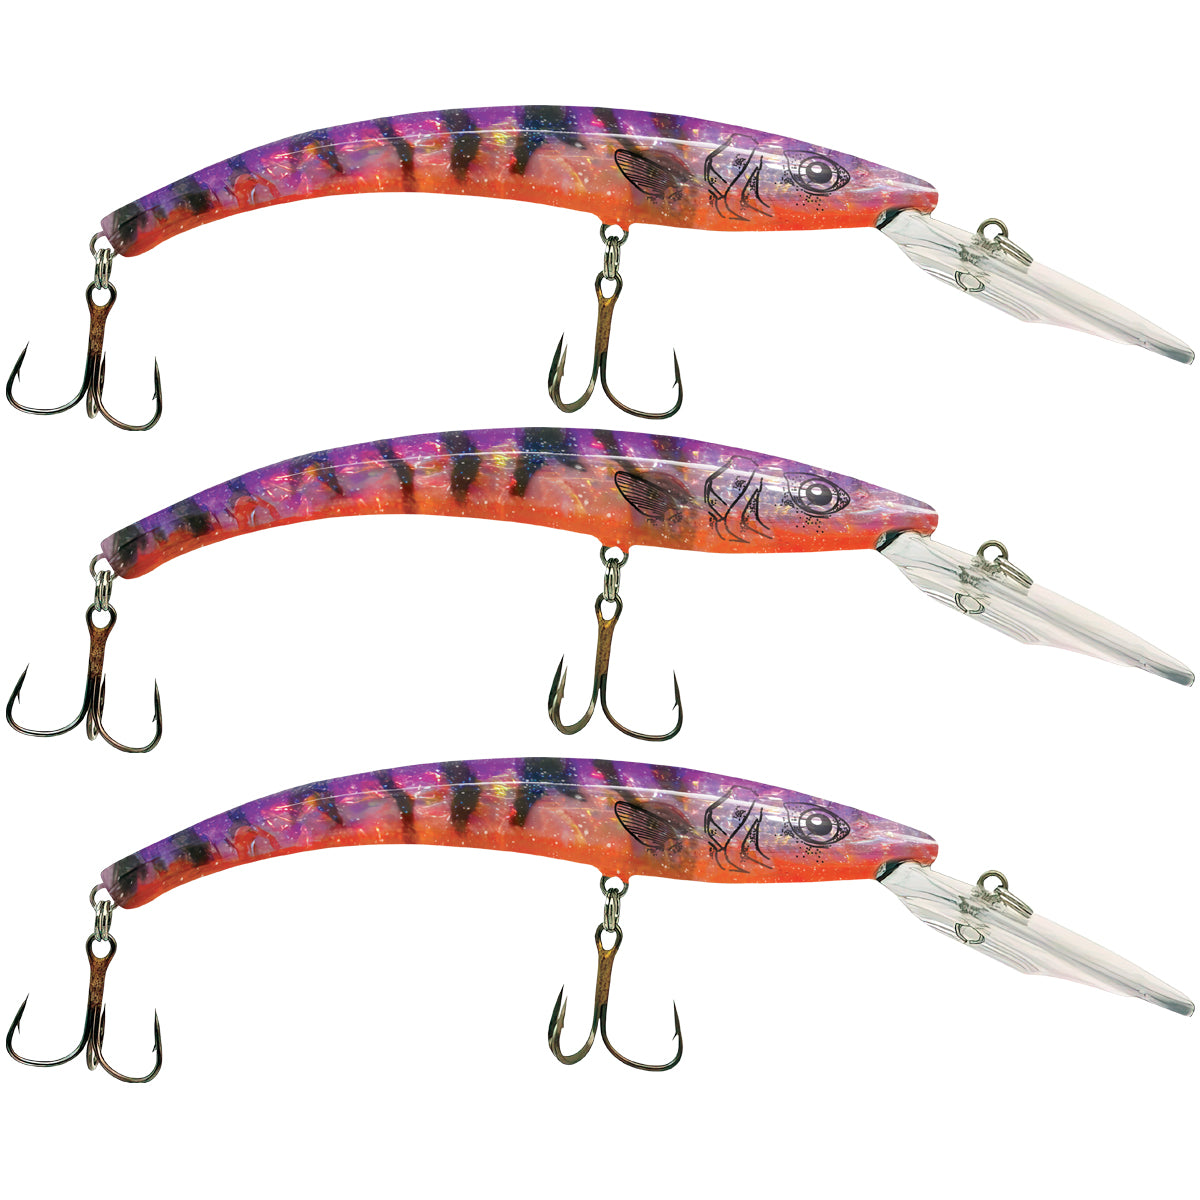 Reef Runner - 8003 Series - Deep Diver 3 Pack - Acme Tackle Company Barenaked Purple Perch Deep Diver 3 Pack